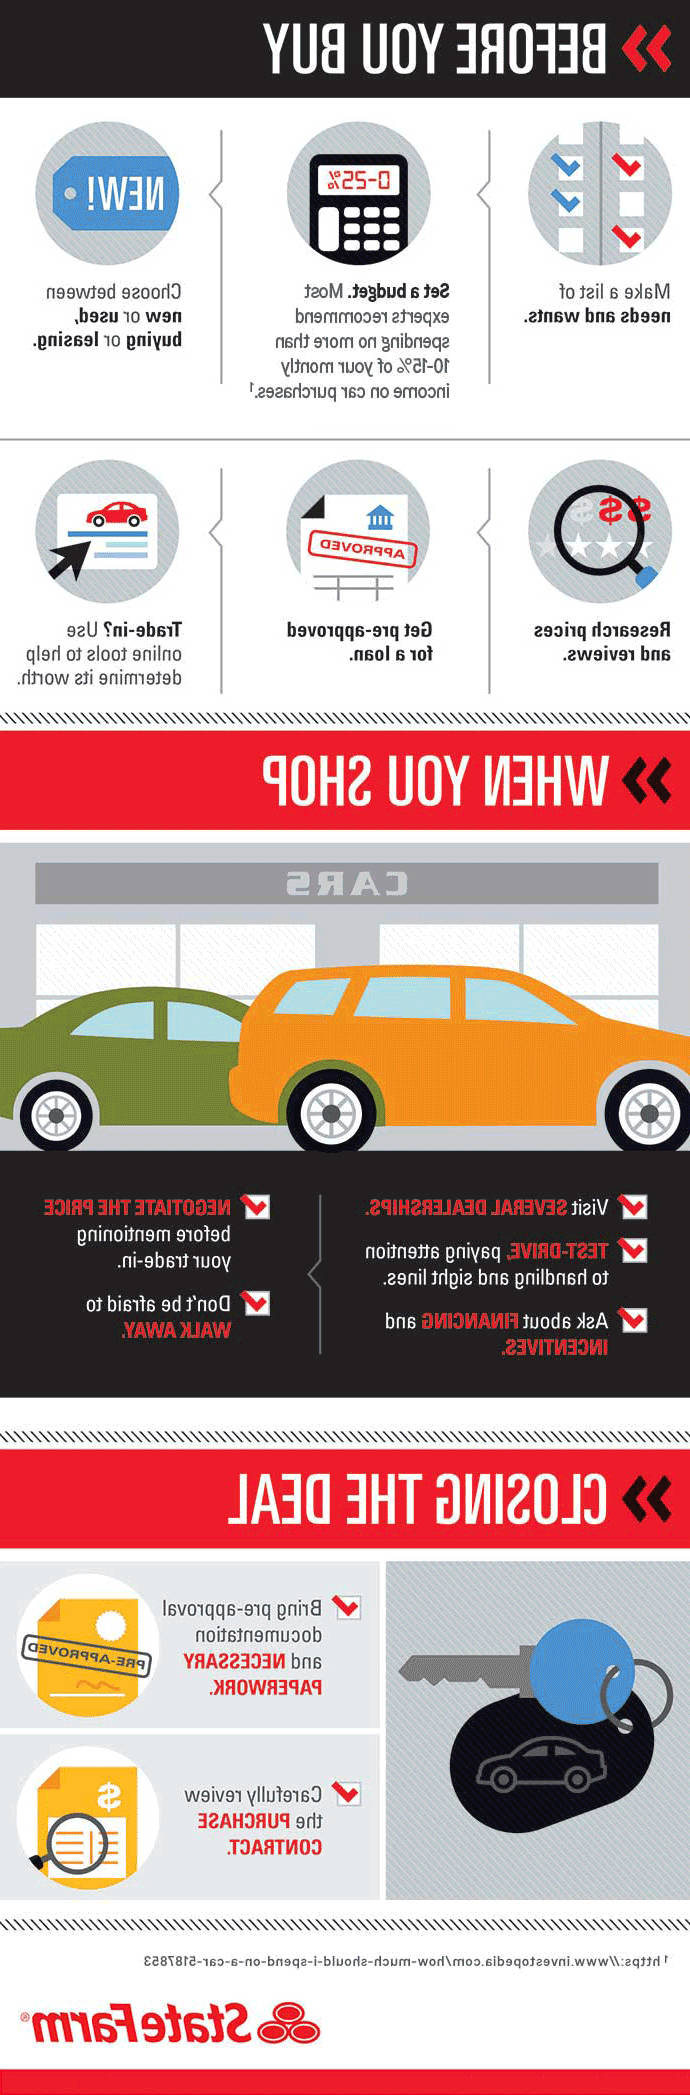 How to buy a new car from a dealership inforgraphic.